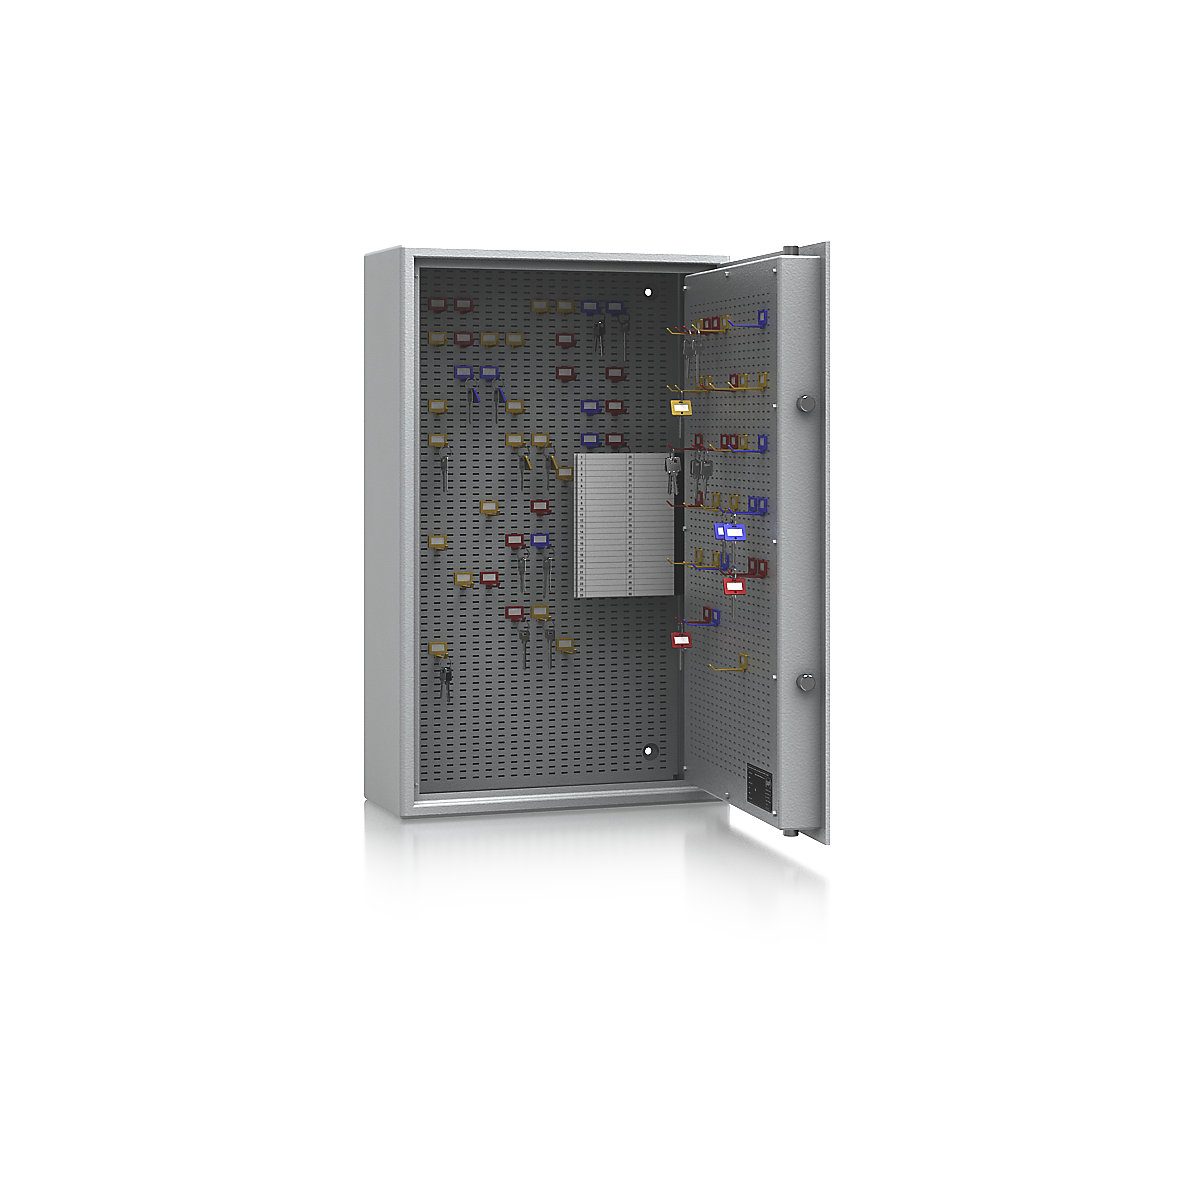 Key safe, security level A and Euro standard S1, light grey, HxWxD 800 x 500 x 200 mm, for up to 200 hooks-4